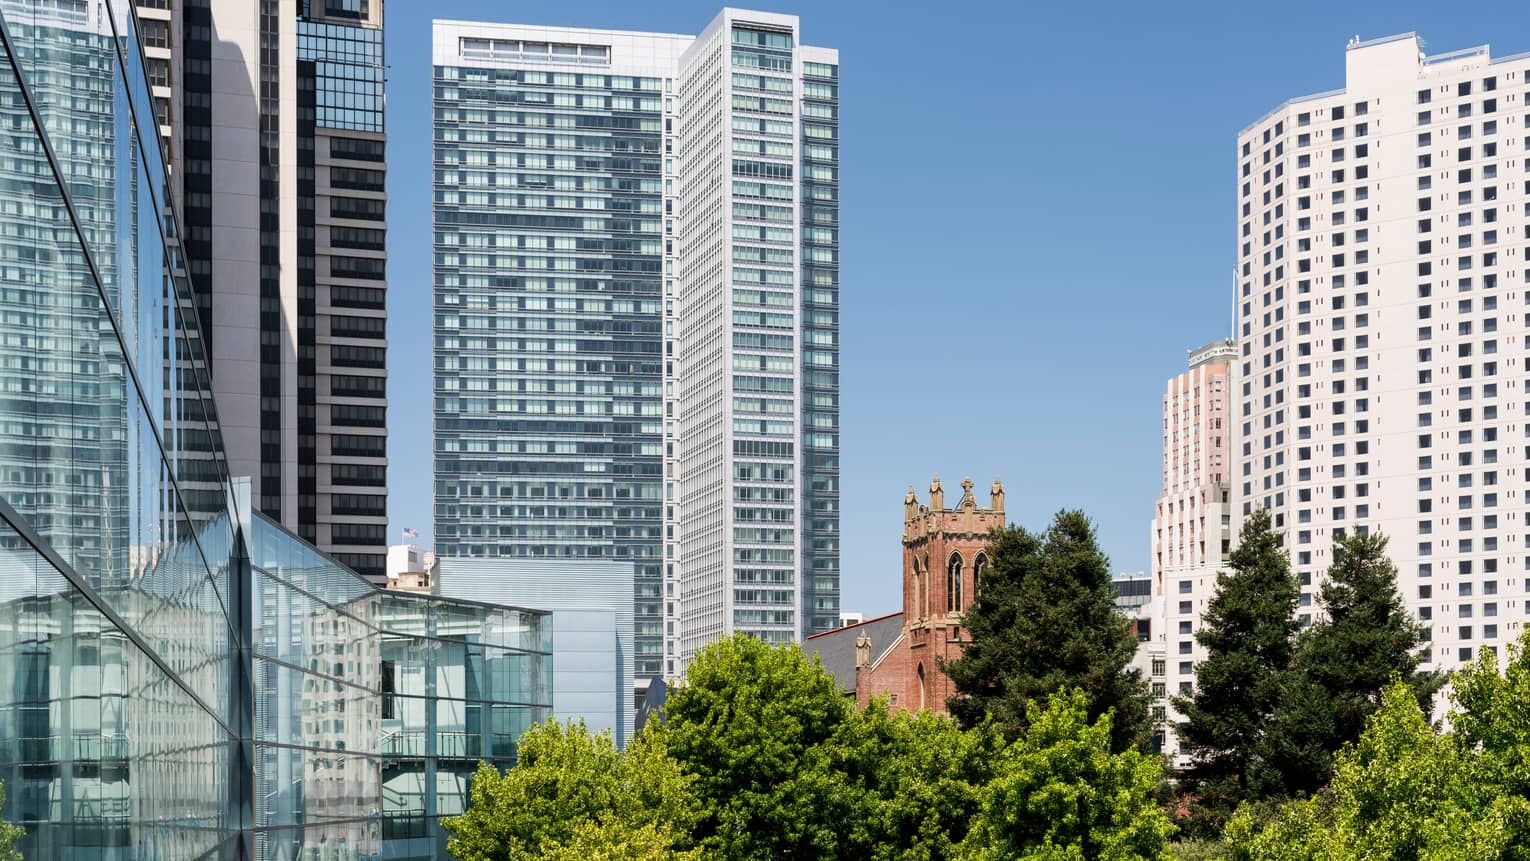 Outdoor view of tall buildings in San Francisco's Yerba Buena neighbourhood on sunny day